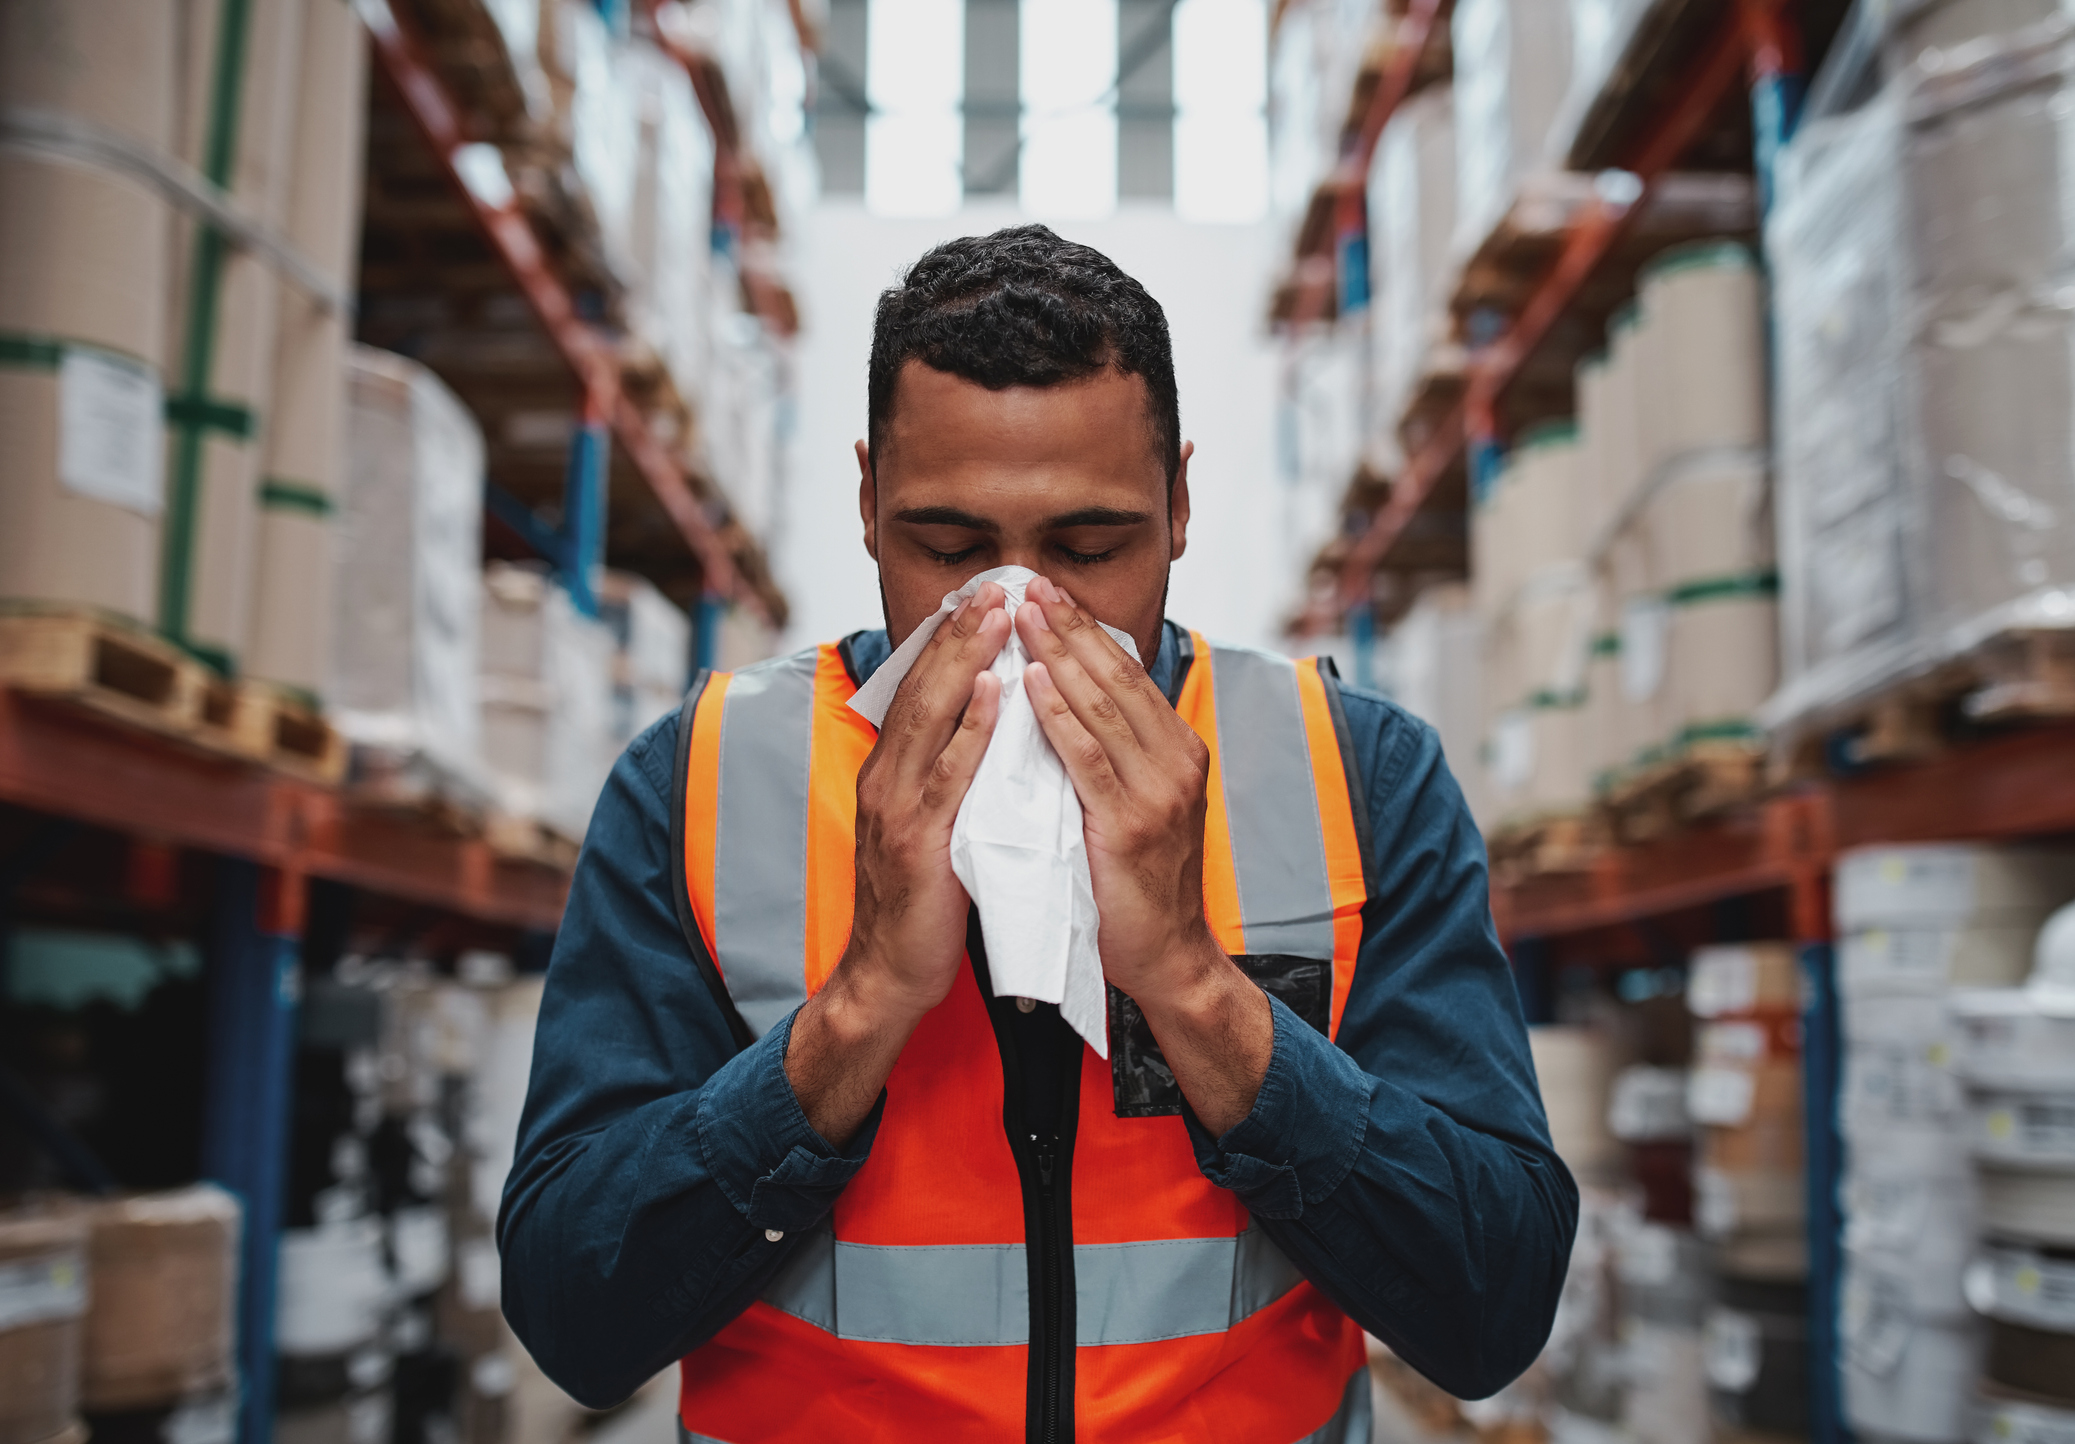 Warehouse worker blowing nose while working wearing safety vest